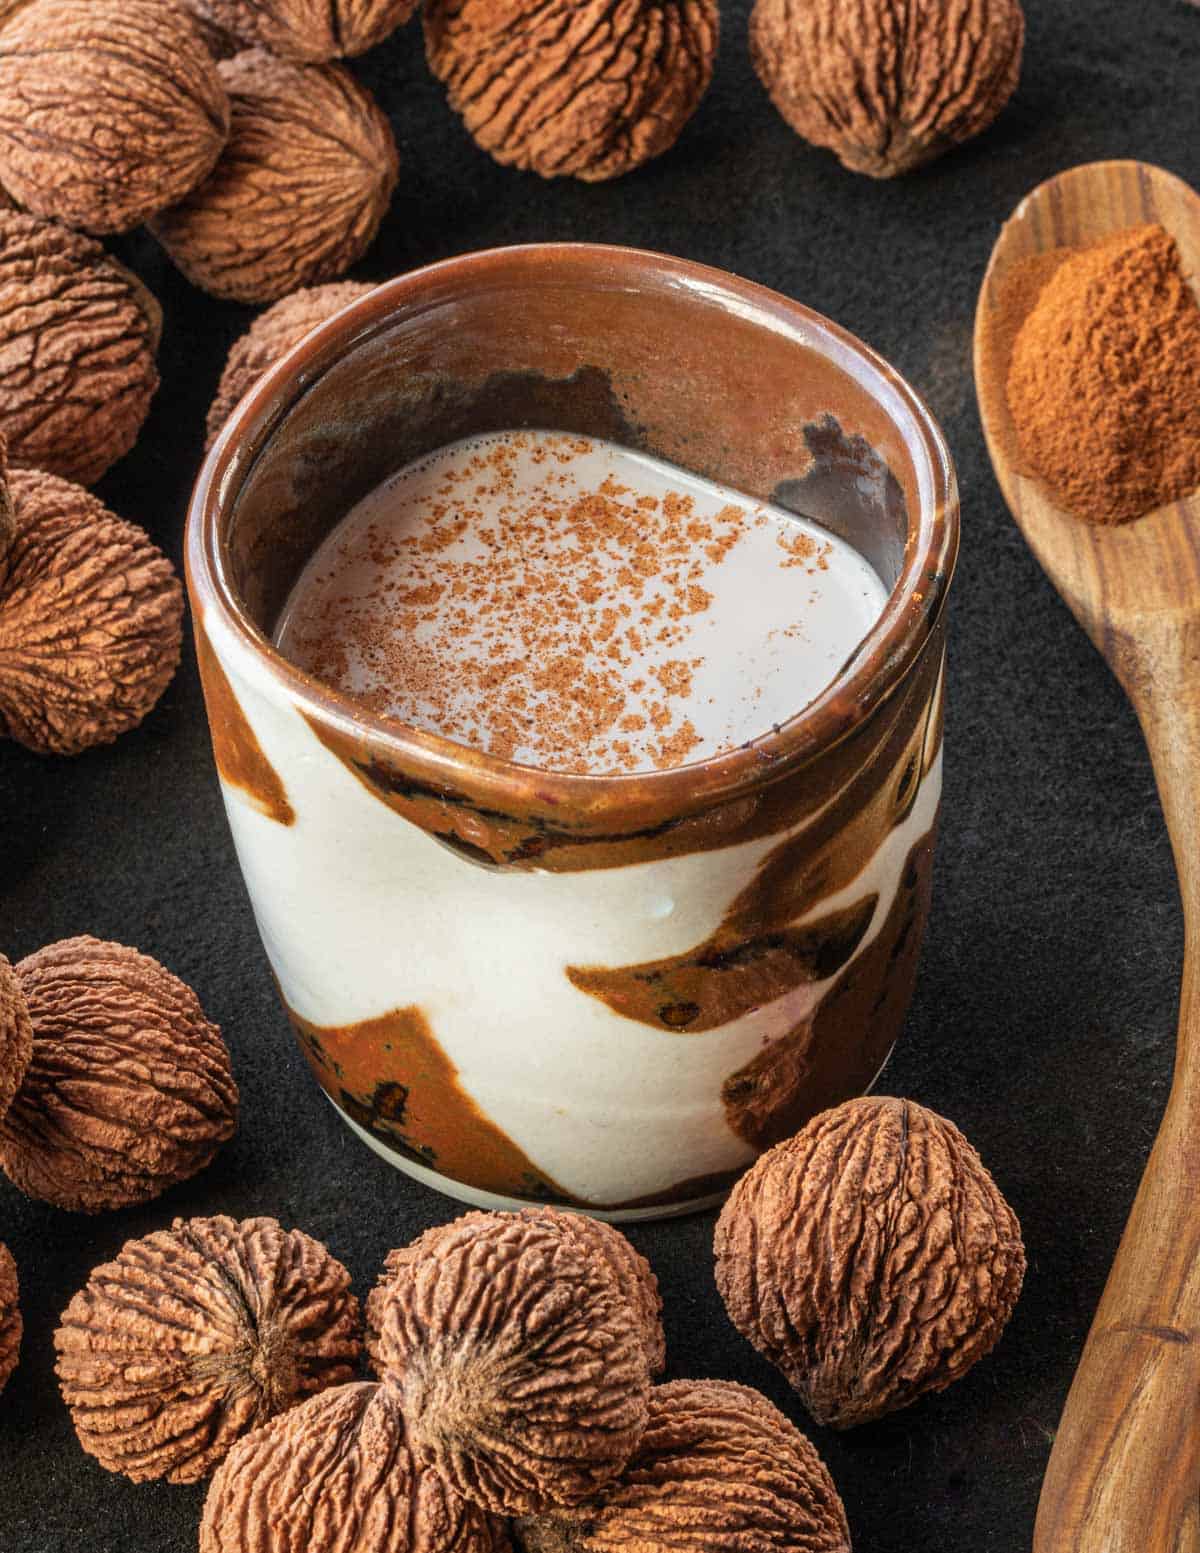 A glass of black walnut milk garnished with cinnamon next to whole black walnuts in the shell. 